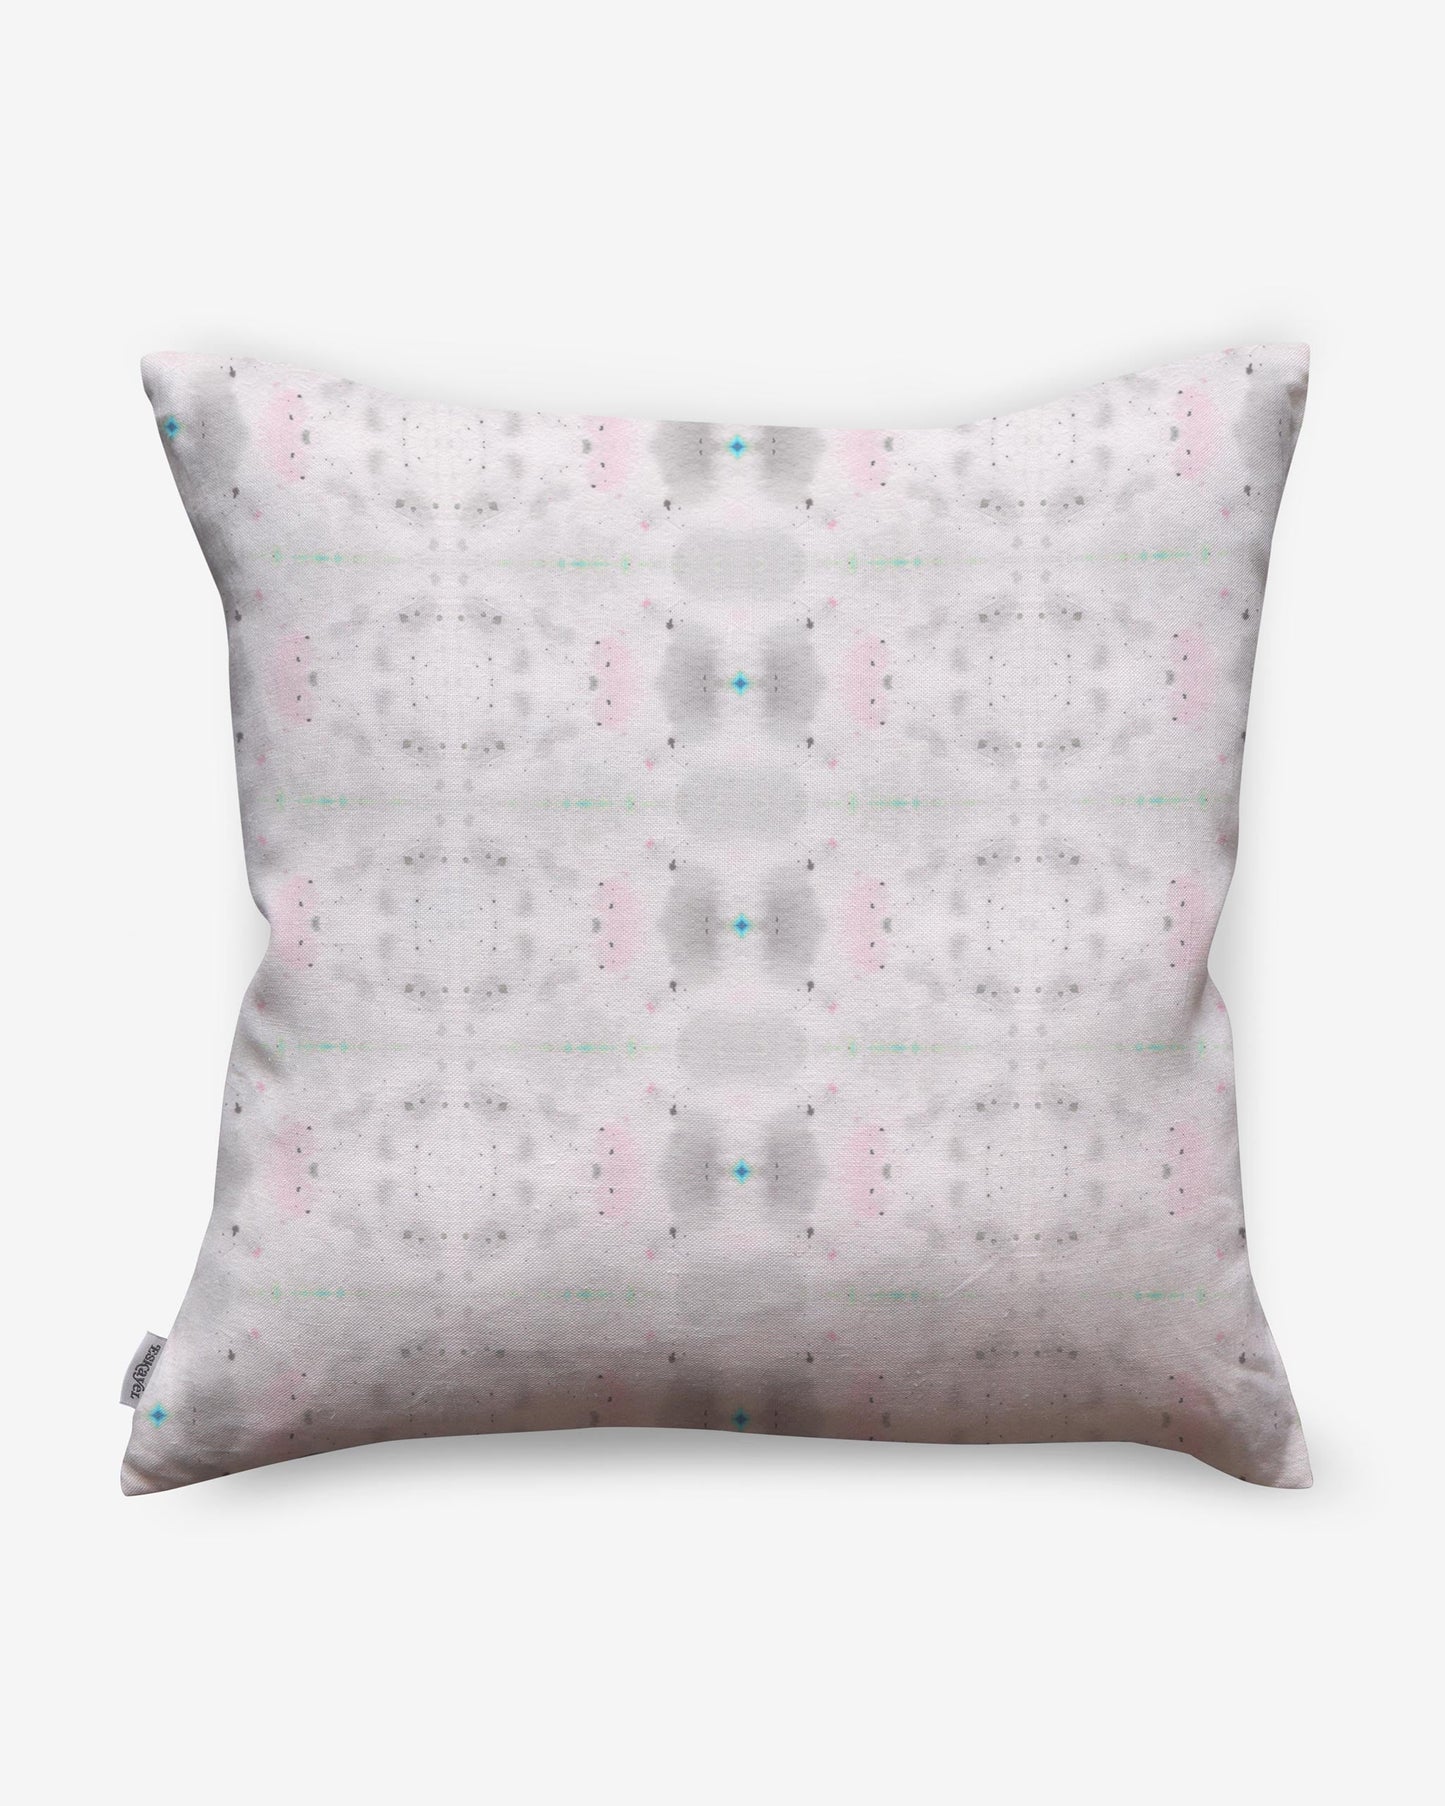 An Astral Pillow with a pink and white pattern from the Jangala Collection